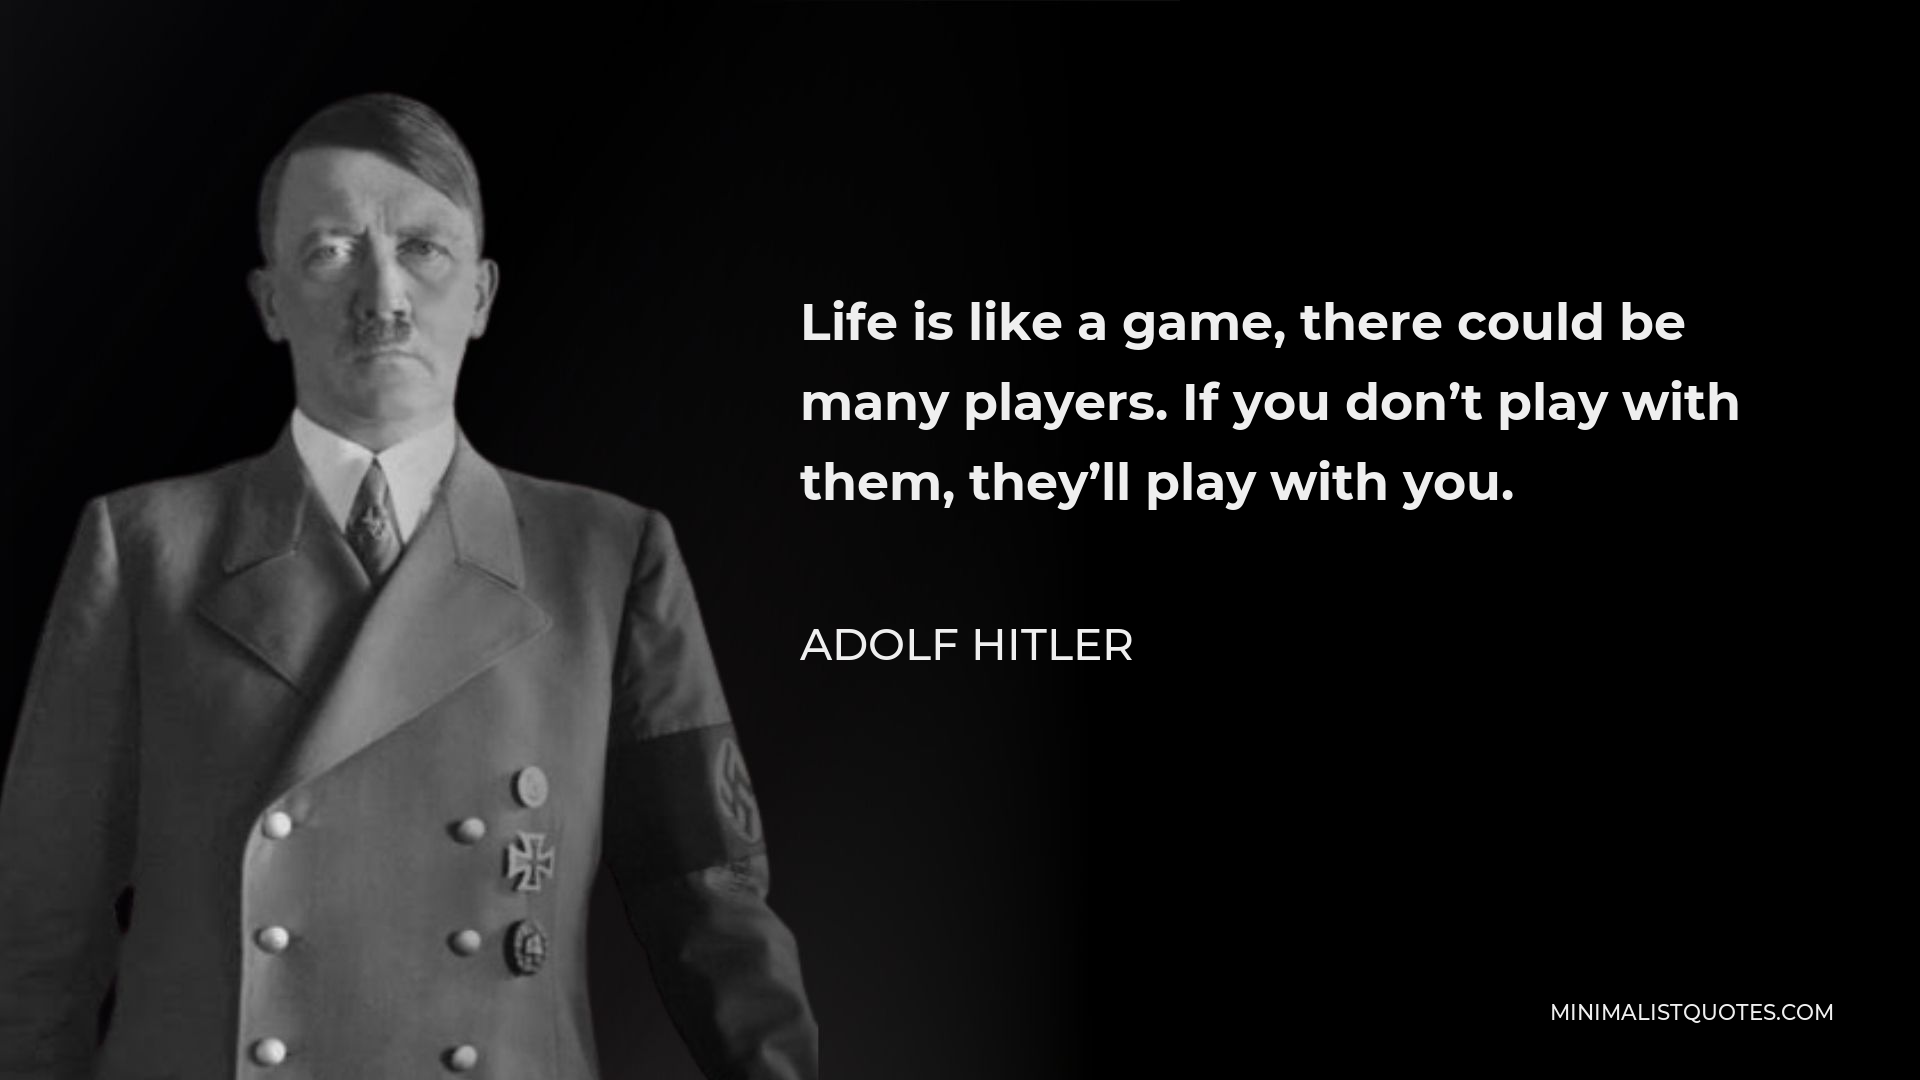 Life is like a game, there could be many players. If you don't play with  them, they'll play with you.